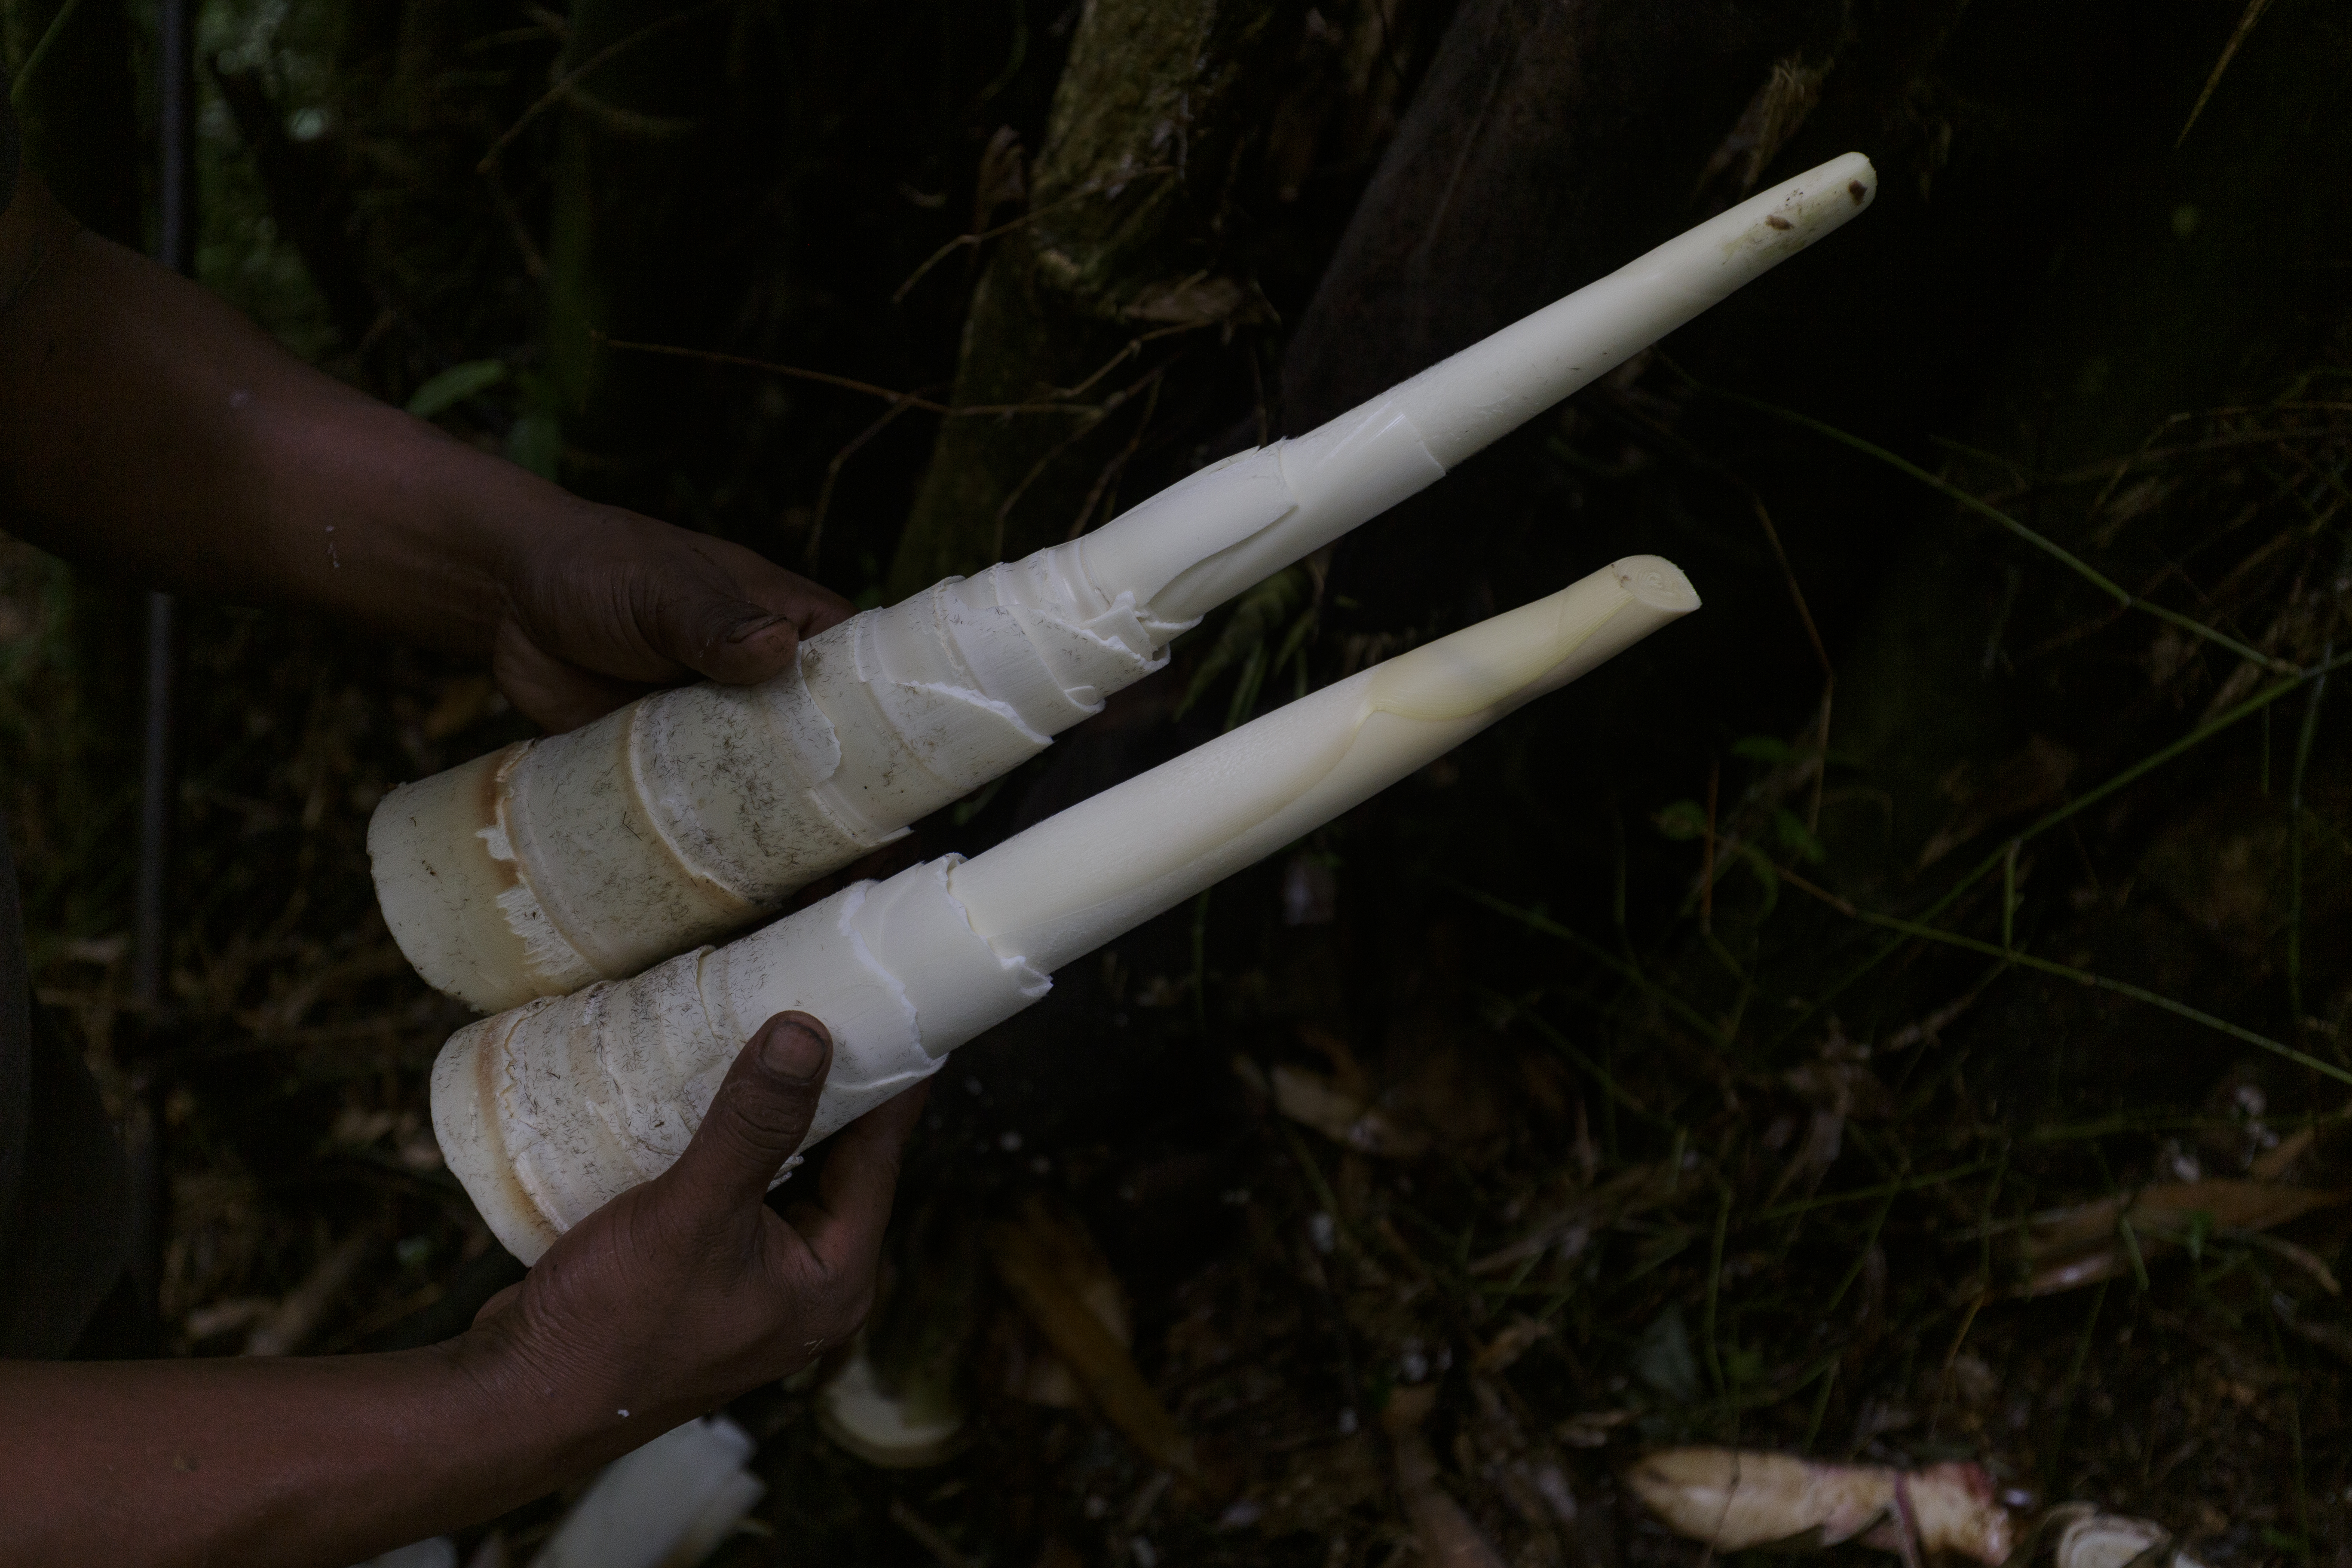 a pair of hands holding two conical young bamboo shoots cut back to their smooth, off-white cores against a forest floor backdrop